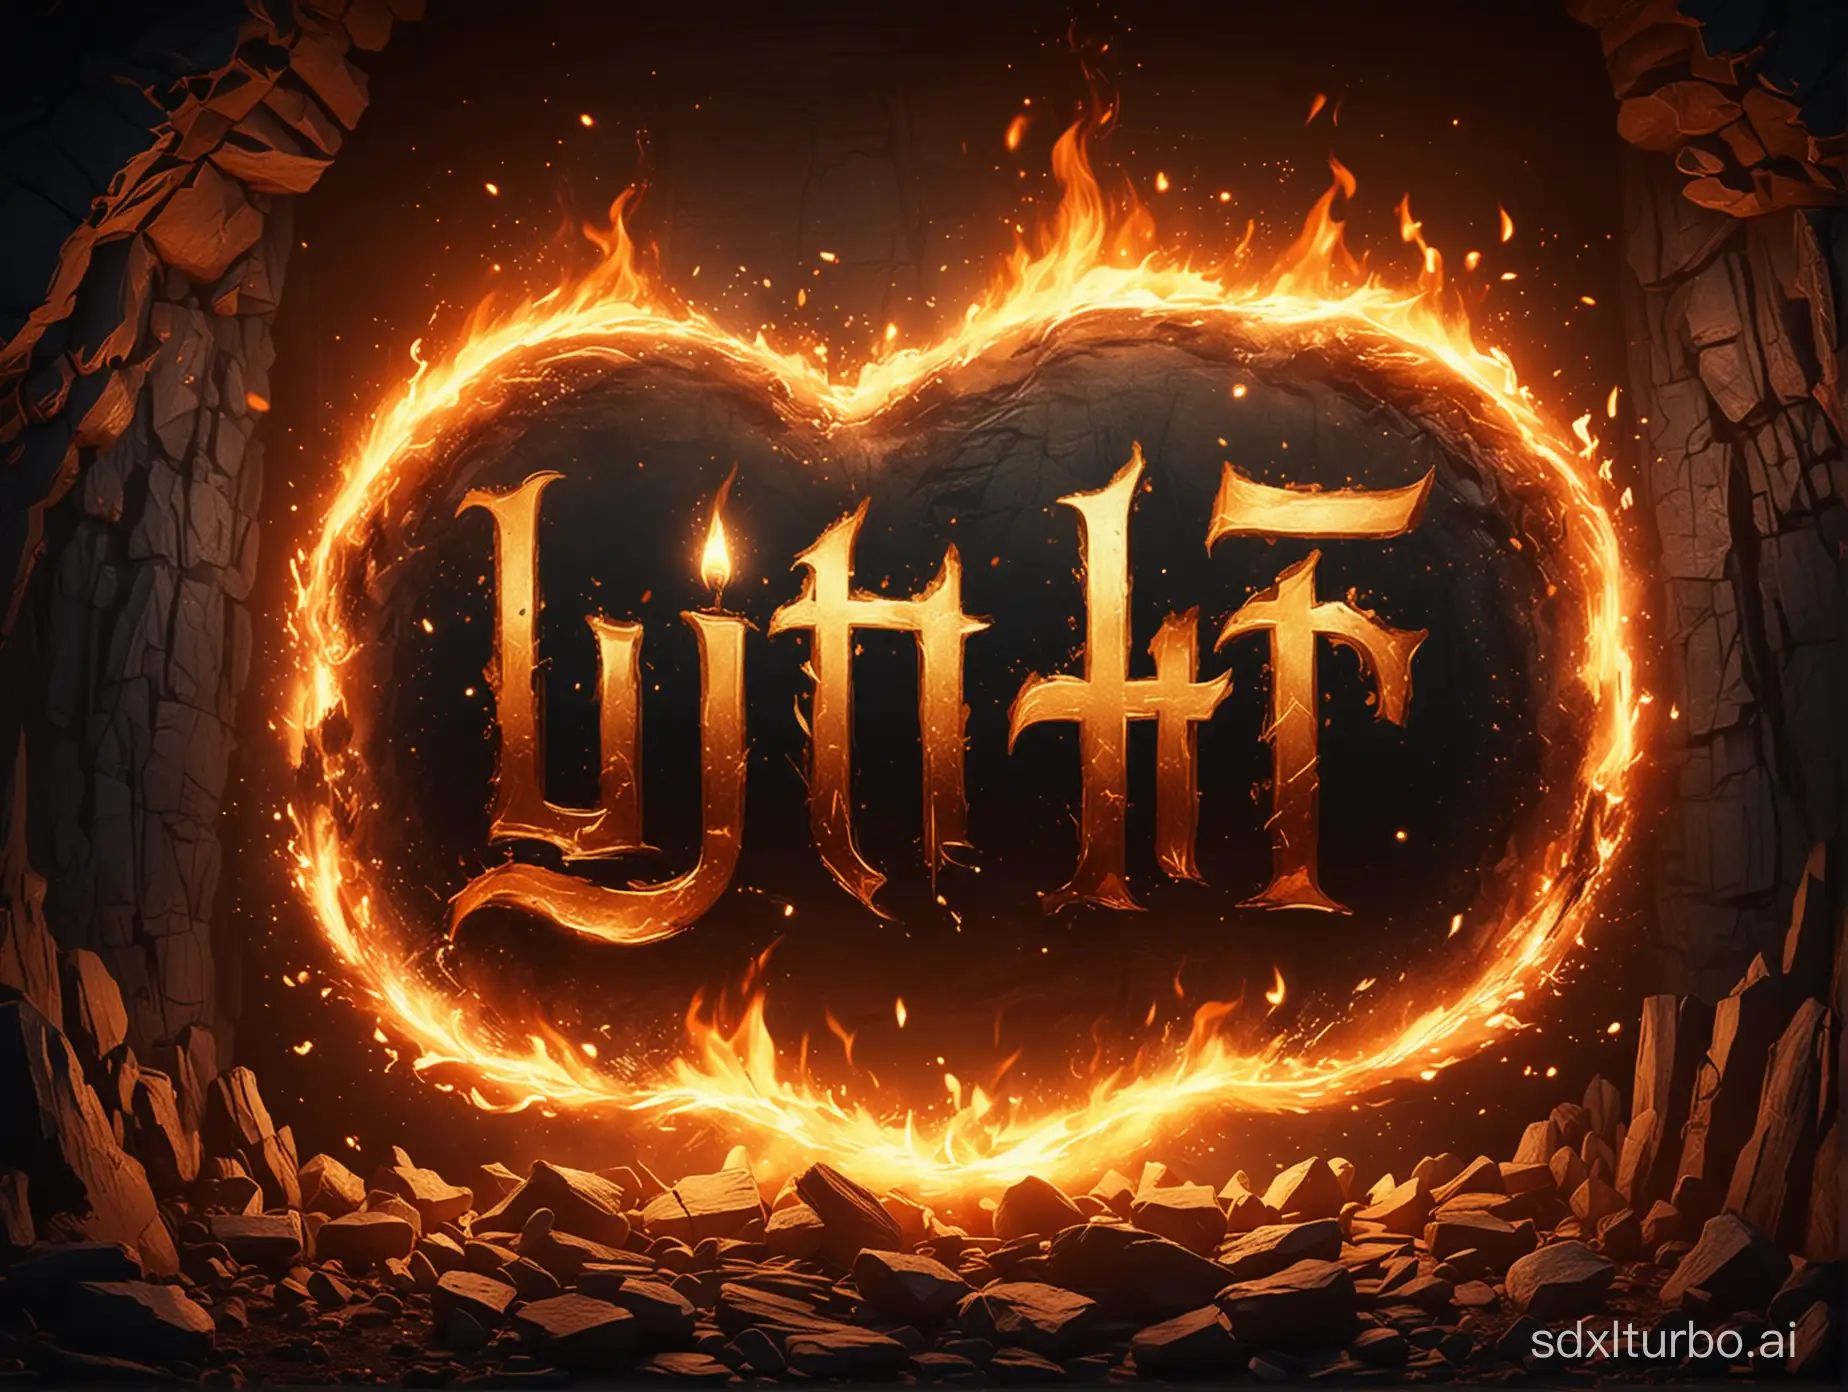 Stylized background with text in the middle "Lit" surround the text with torch fire